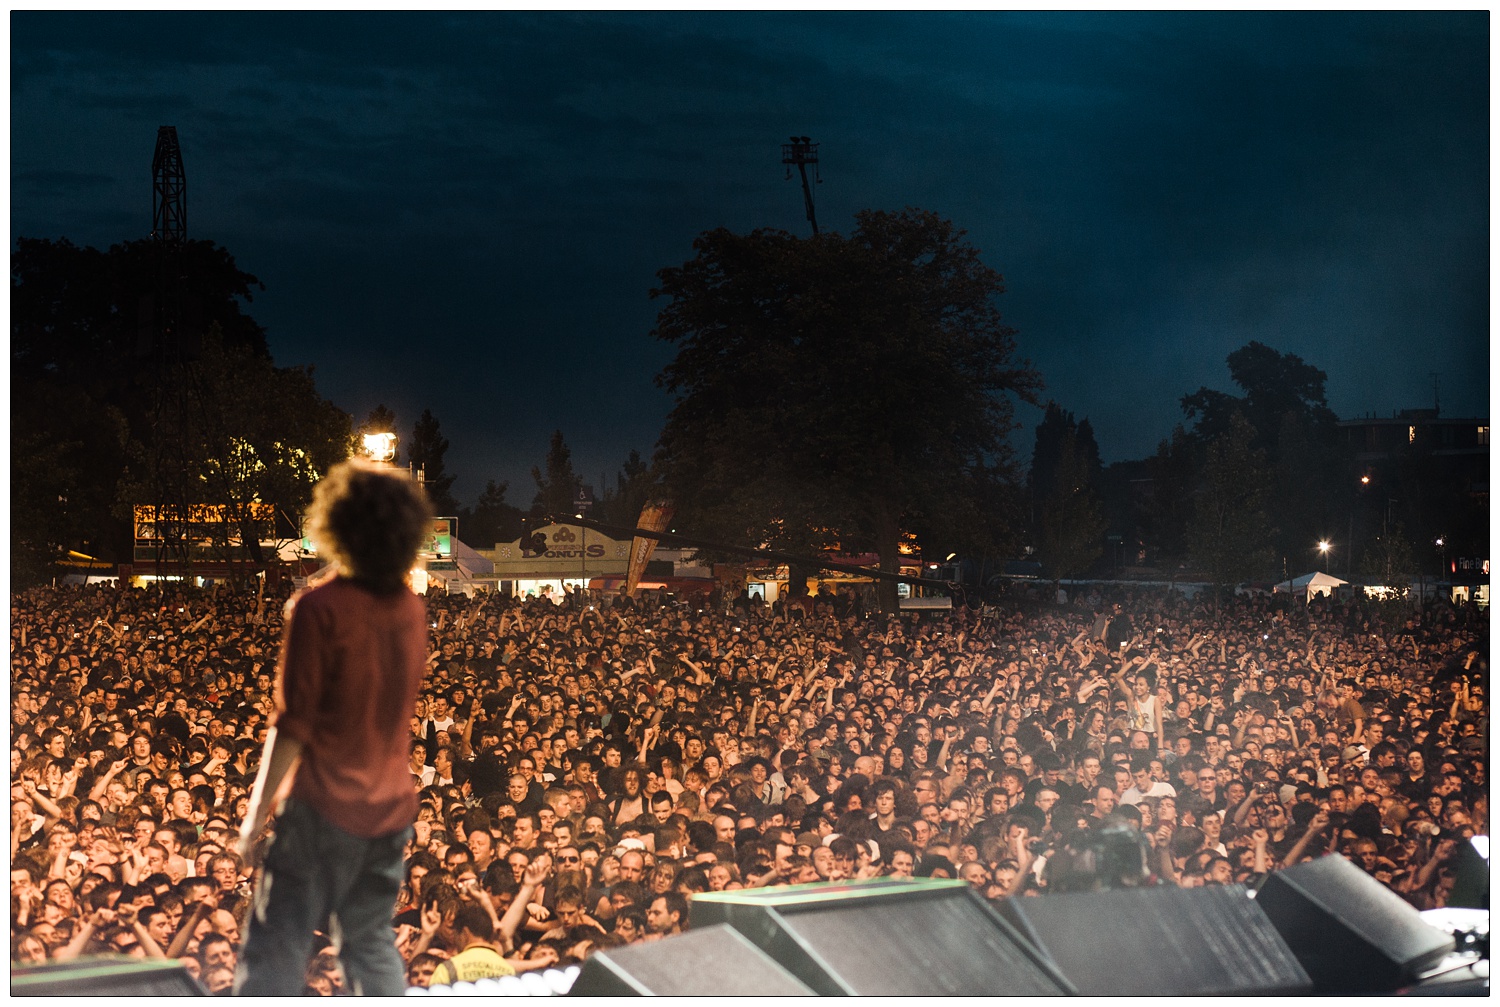 View of the crowd and Zack de la Rocha at Rage Against the Machine gig from the stage at Finsbury Park.